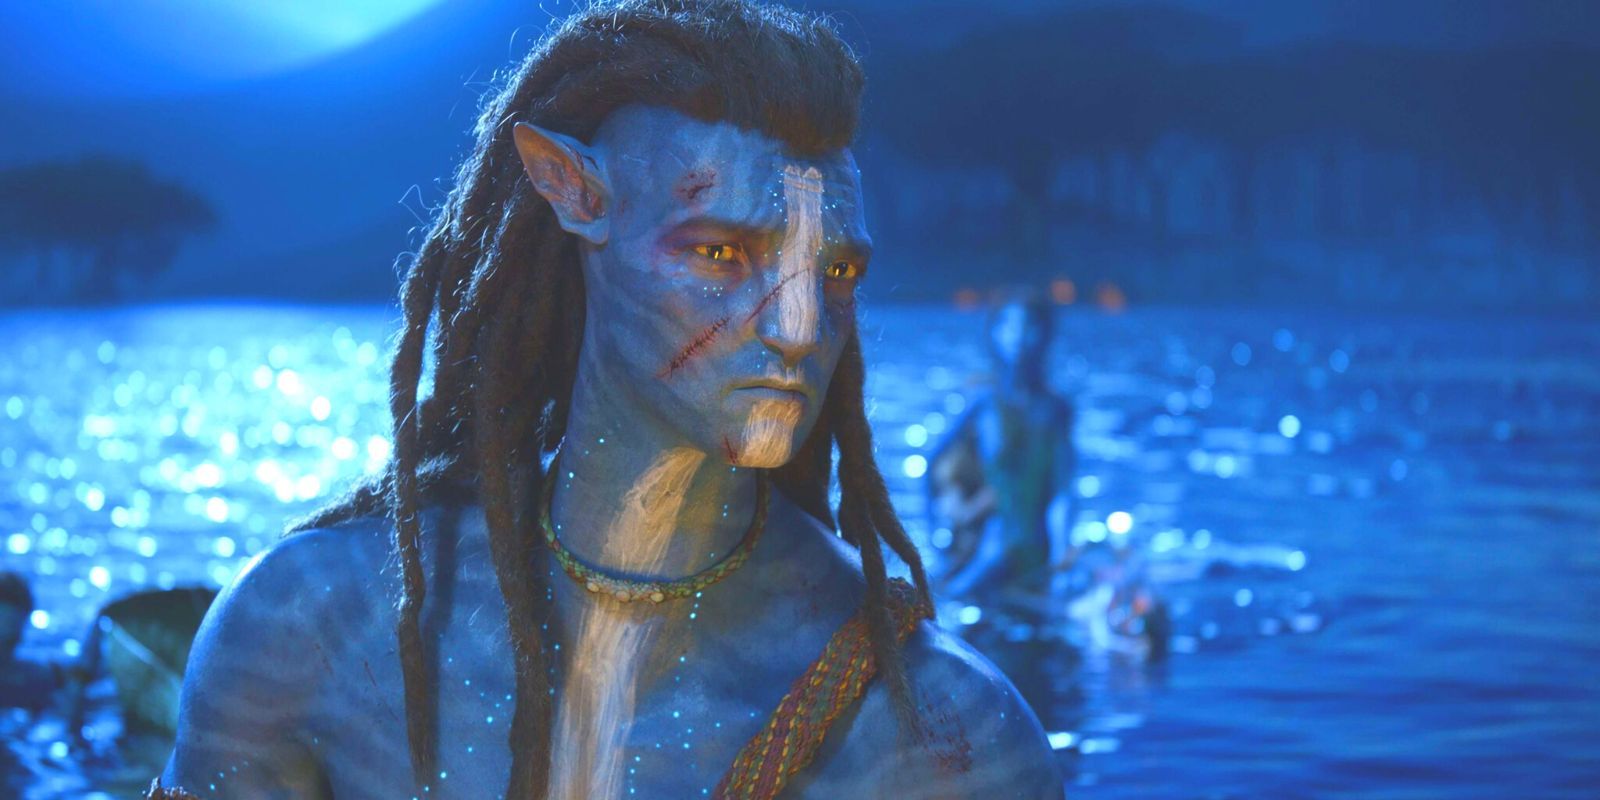 Jake Sully looking concerned while standing on a moonlit beach in Avatar: The Way of Water